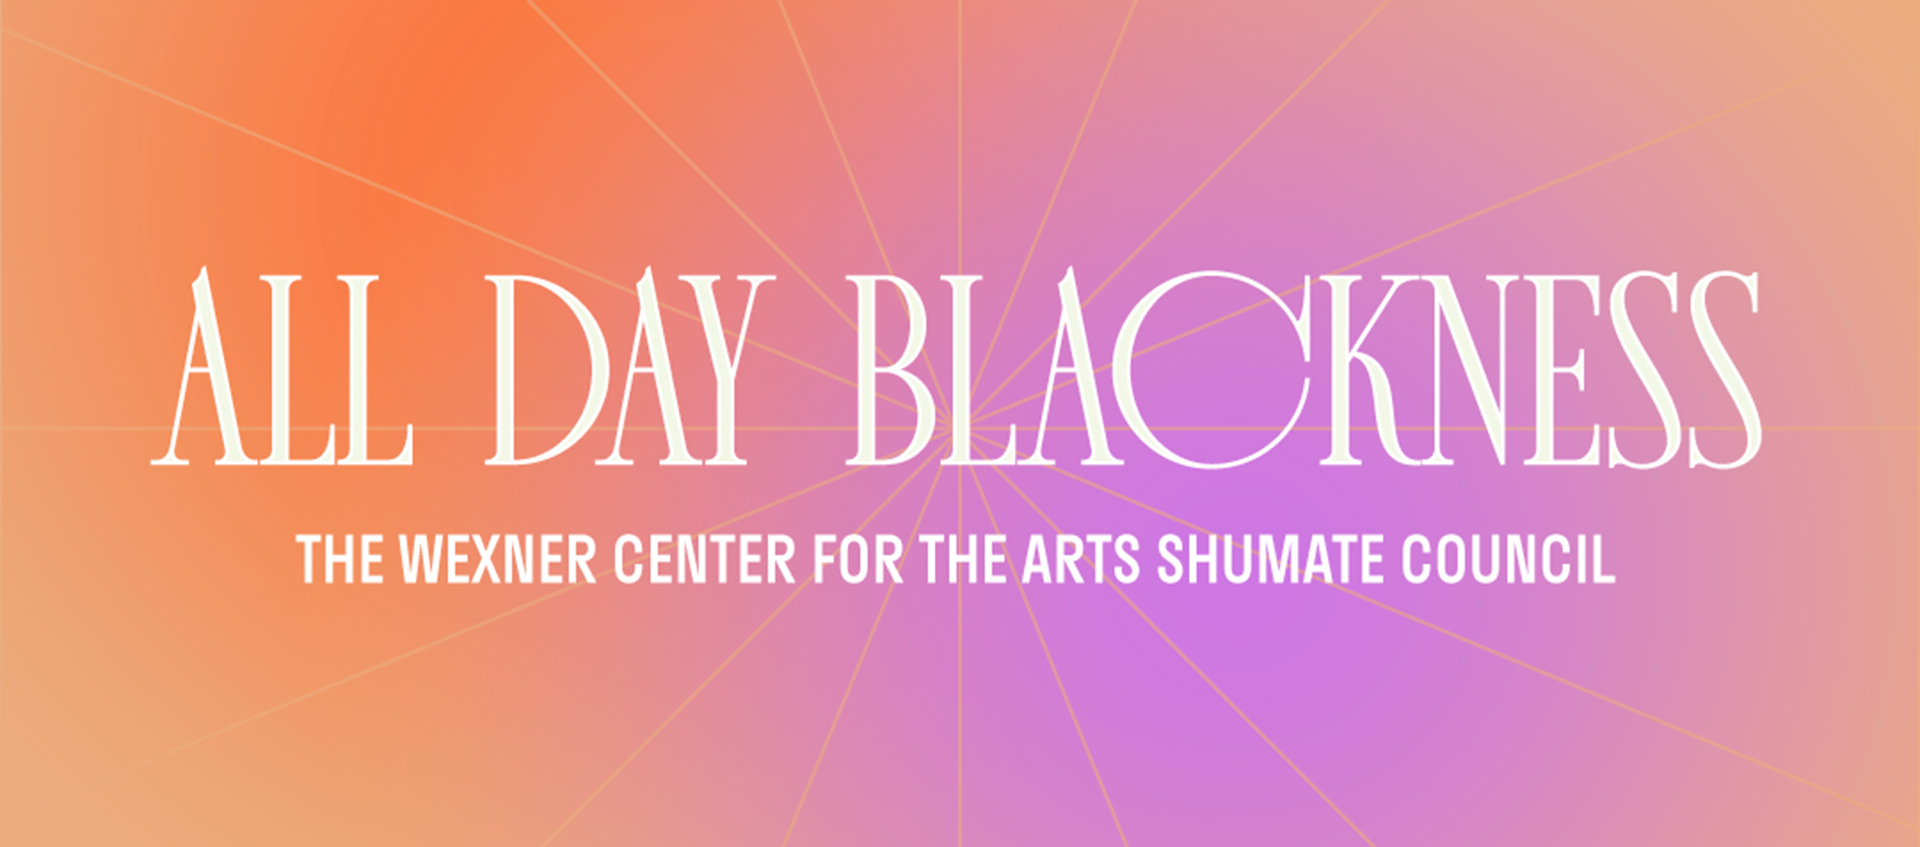 Graphic reading "All Day Blackness / The Wexner Center for the Arts Shumate Council